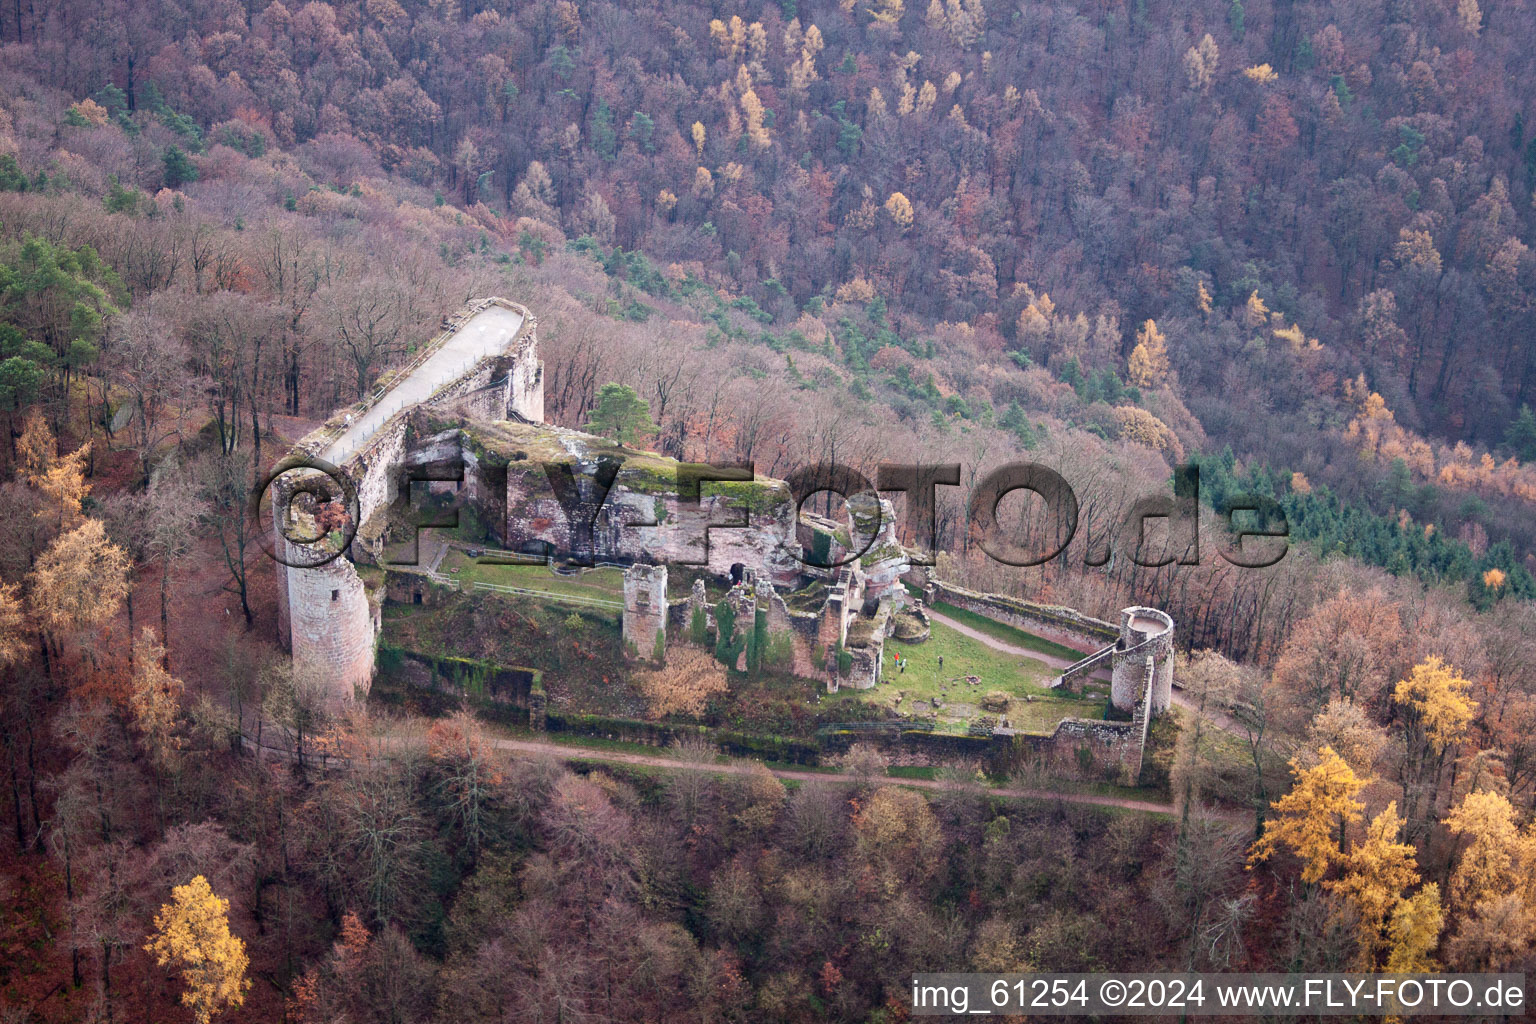 Ruins and vestiges of the former castle in Ramberg in the state Rhineland-Palatinate